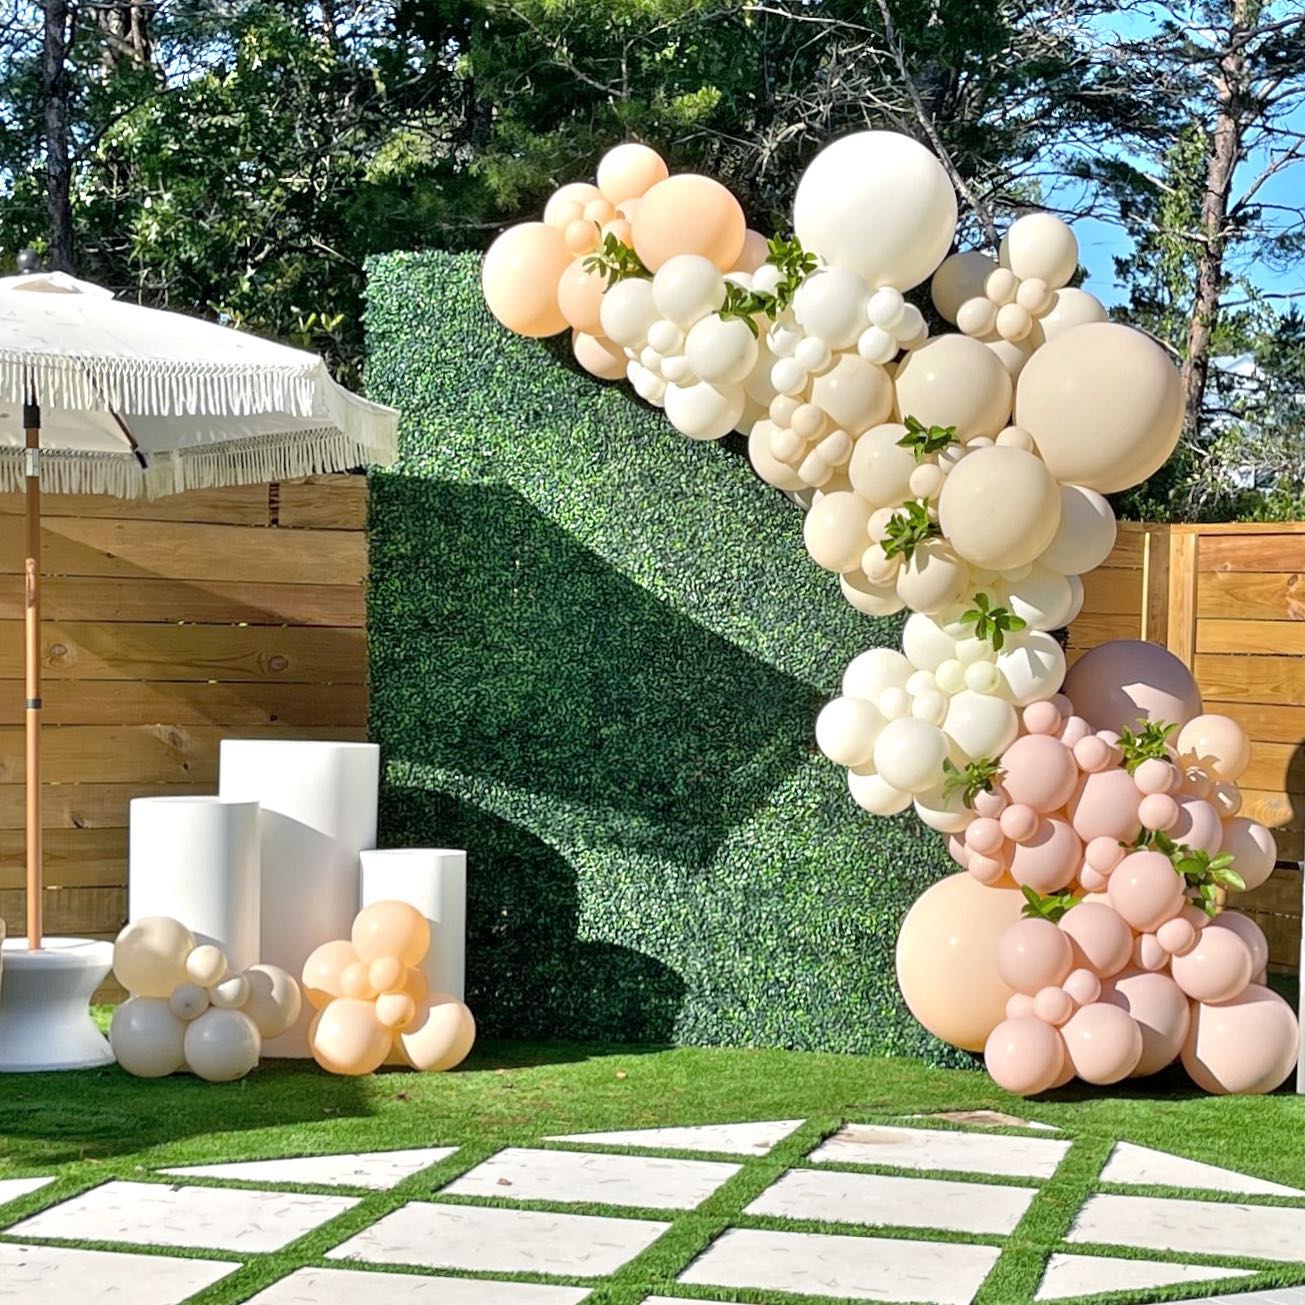 Remember what we said a few days ago about all the different ways to style our greenery wall? Yep! We meant it. 

Ready to Mingle With Us? Click the link in our bio to book your 2022 events! 

#hedgewall #balloongarland #ballooninstallation #photobackdrop #eventstylist #partystylist #eventplanner #30A #destin #pcb #santarosabeach